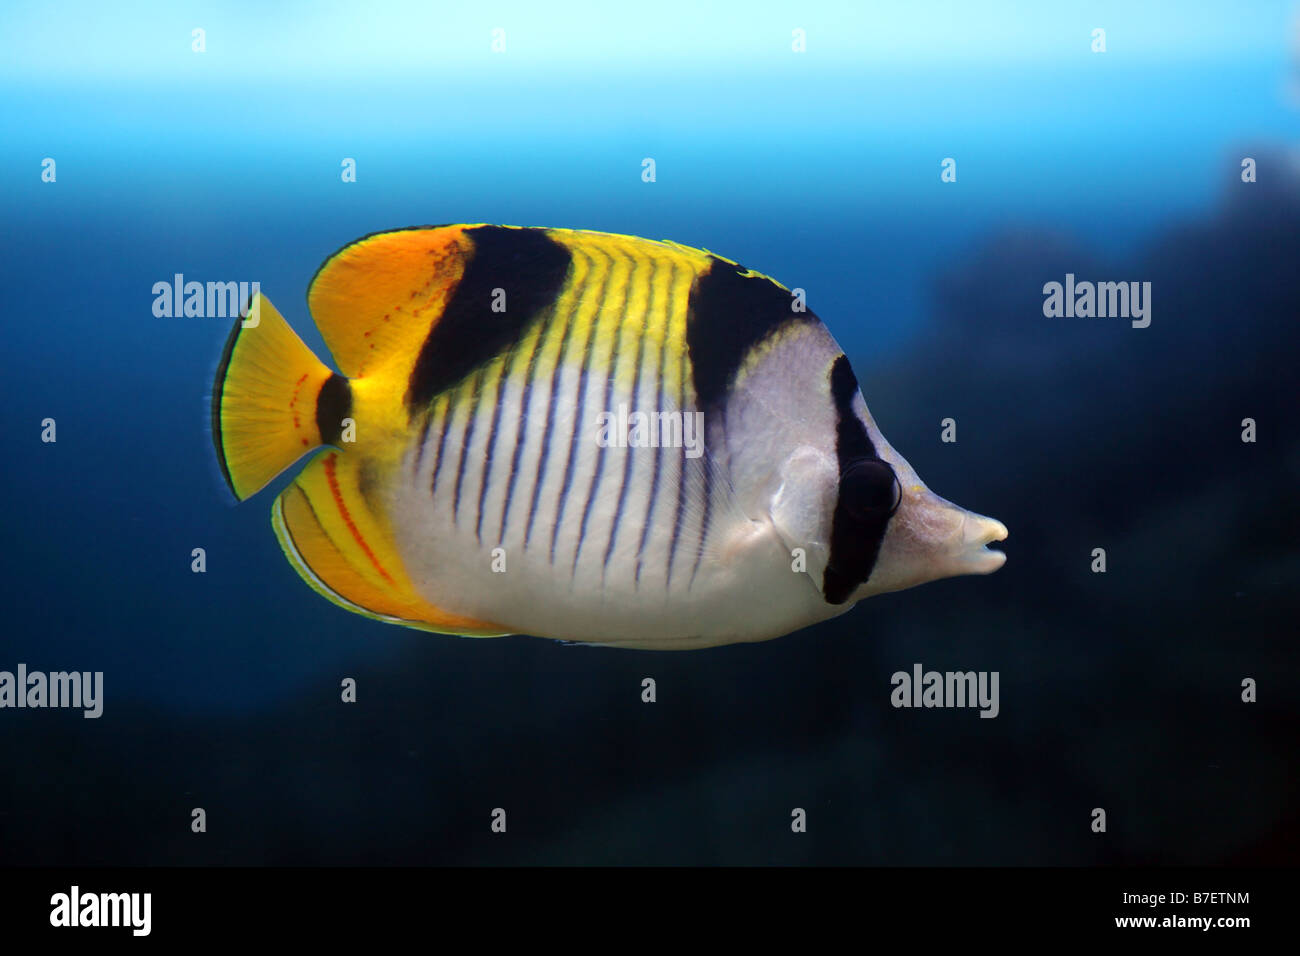 Fish butterfly with a yellow tail in aquarium Stock Photo